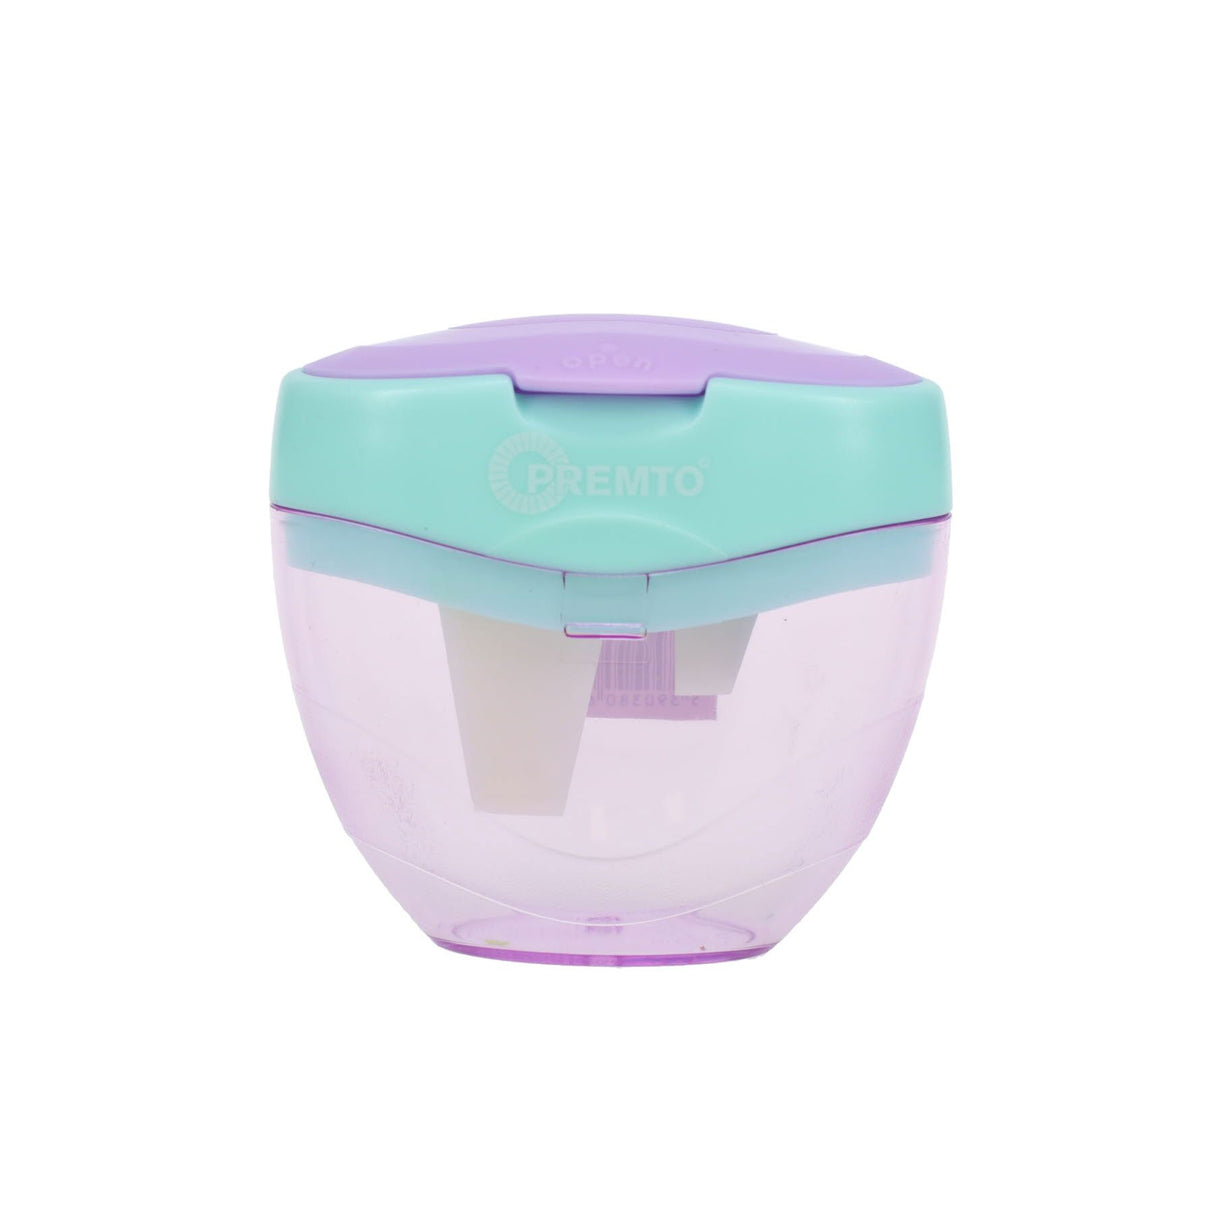 Premto Pastel Three Hole Sharpener - Mint Magic and Wild Orchid | Stationery Shop UK